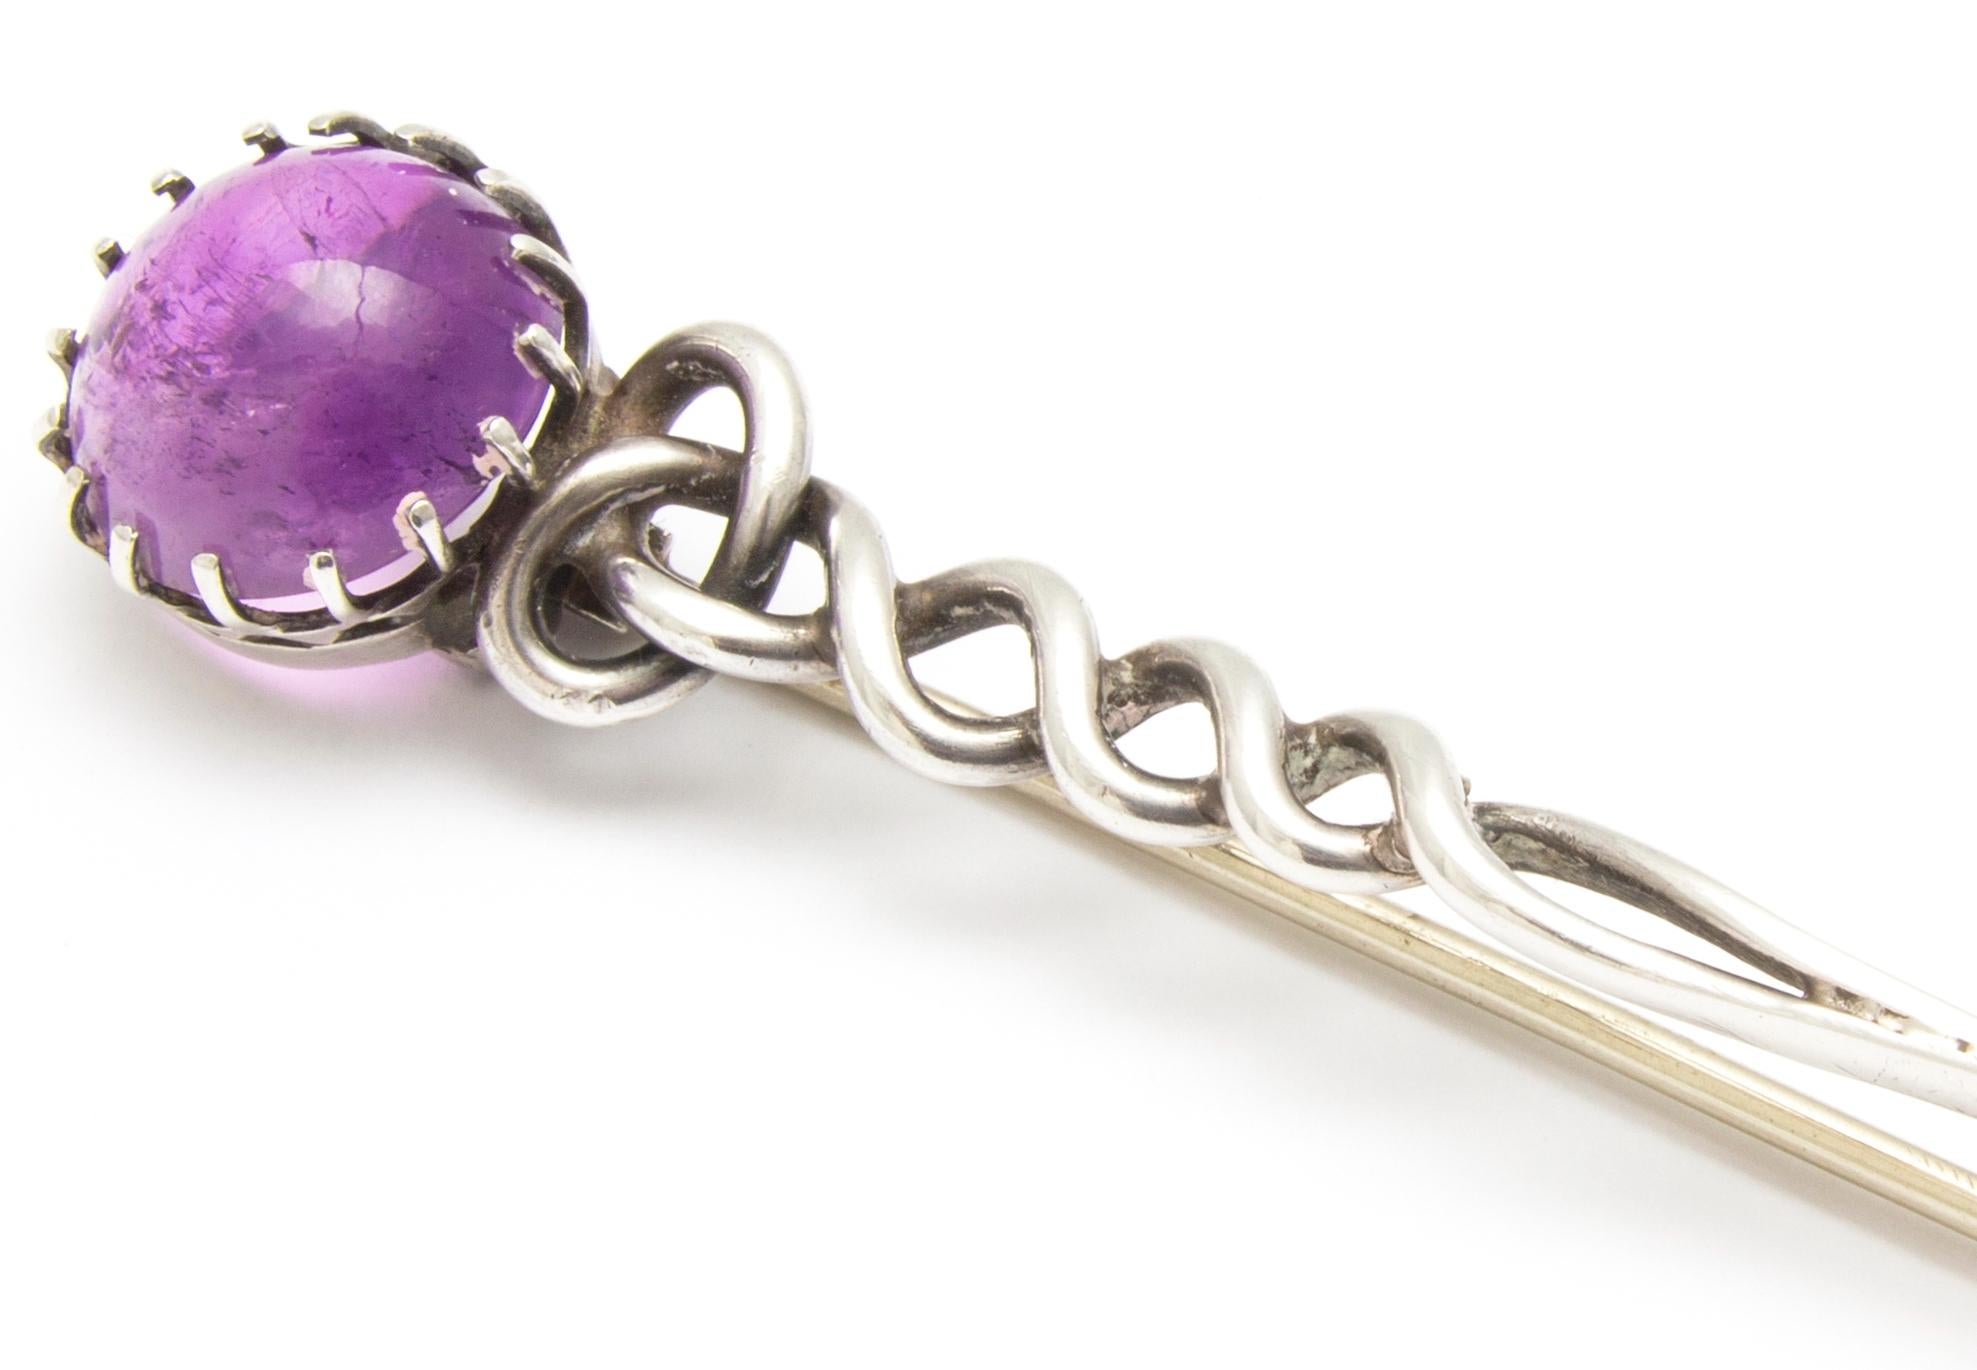 From the Arts and Crafts period, and with a distinctly Celtic style, this is an elegant sterling silver brooch in a twisted rope design. It terminates with a cabochon amethyst stone of soft purple. The brooch fastens securely with a long pin on the